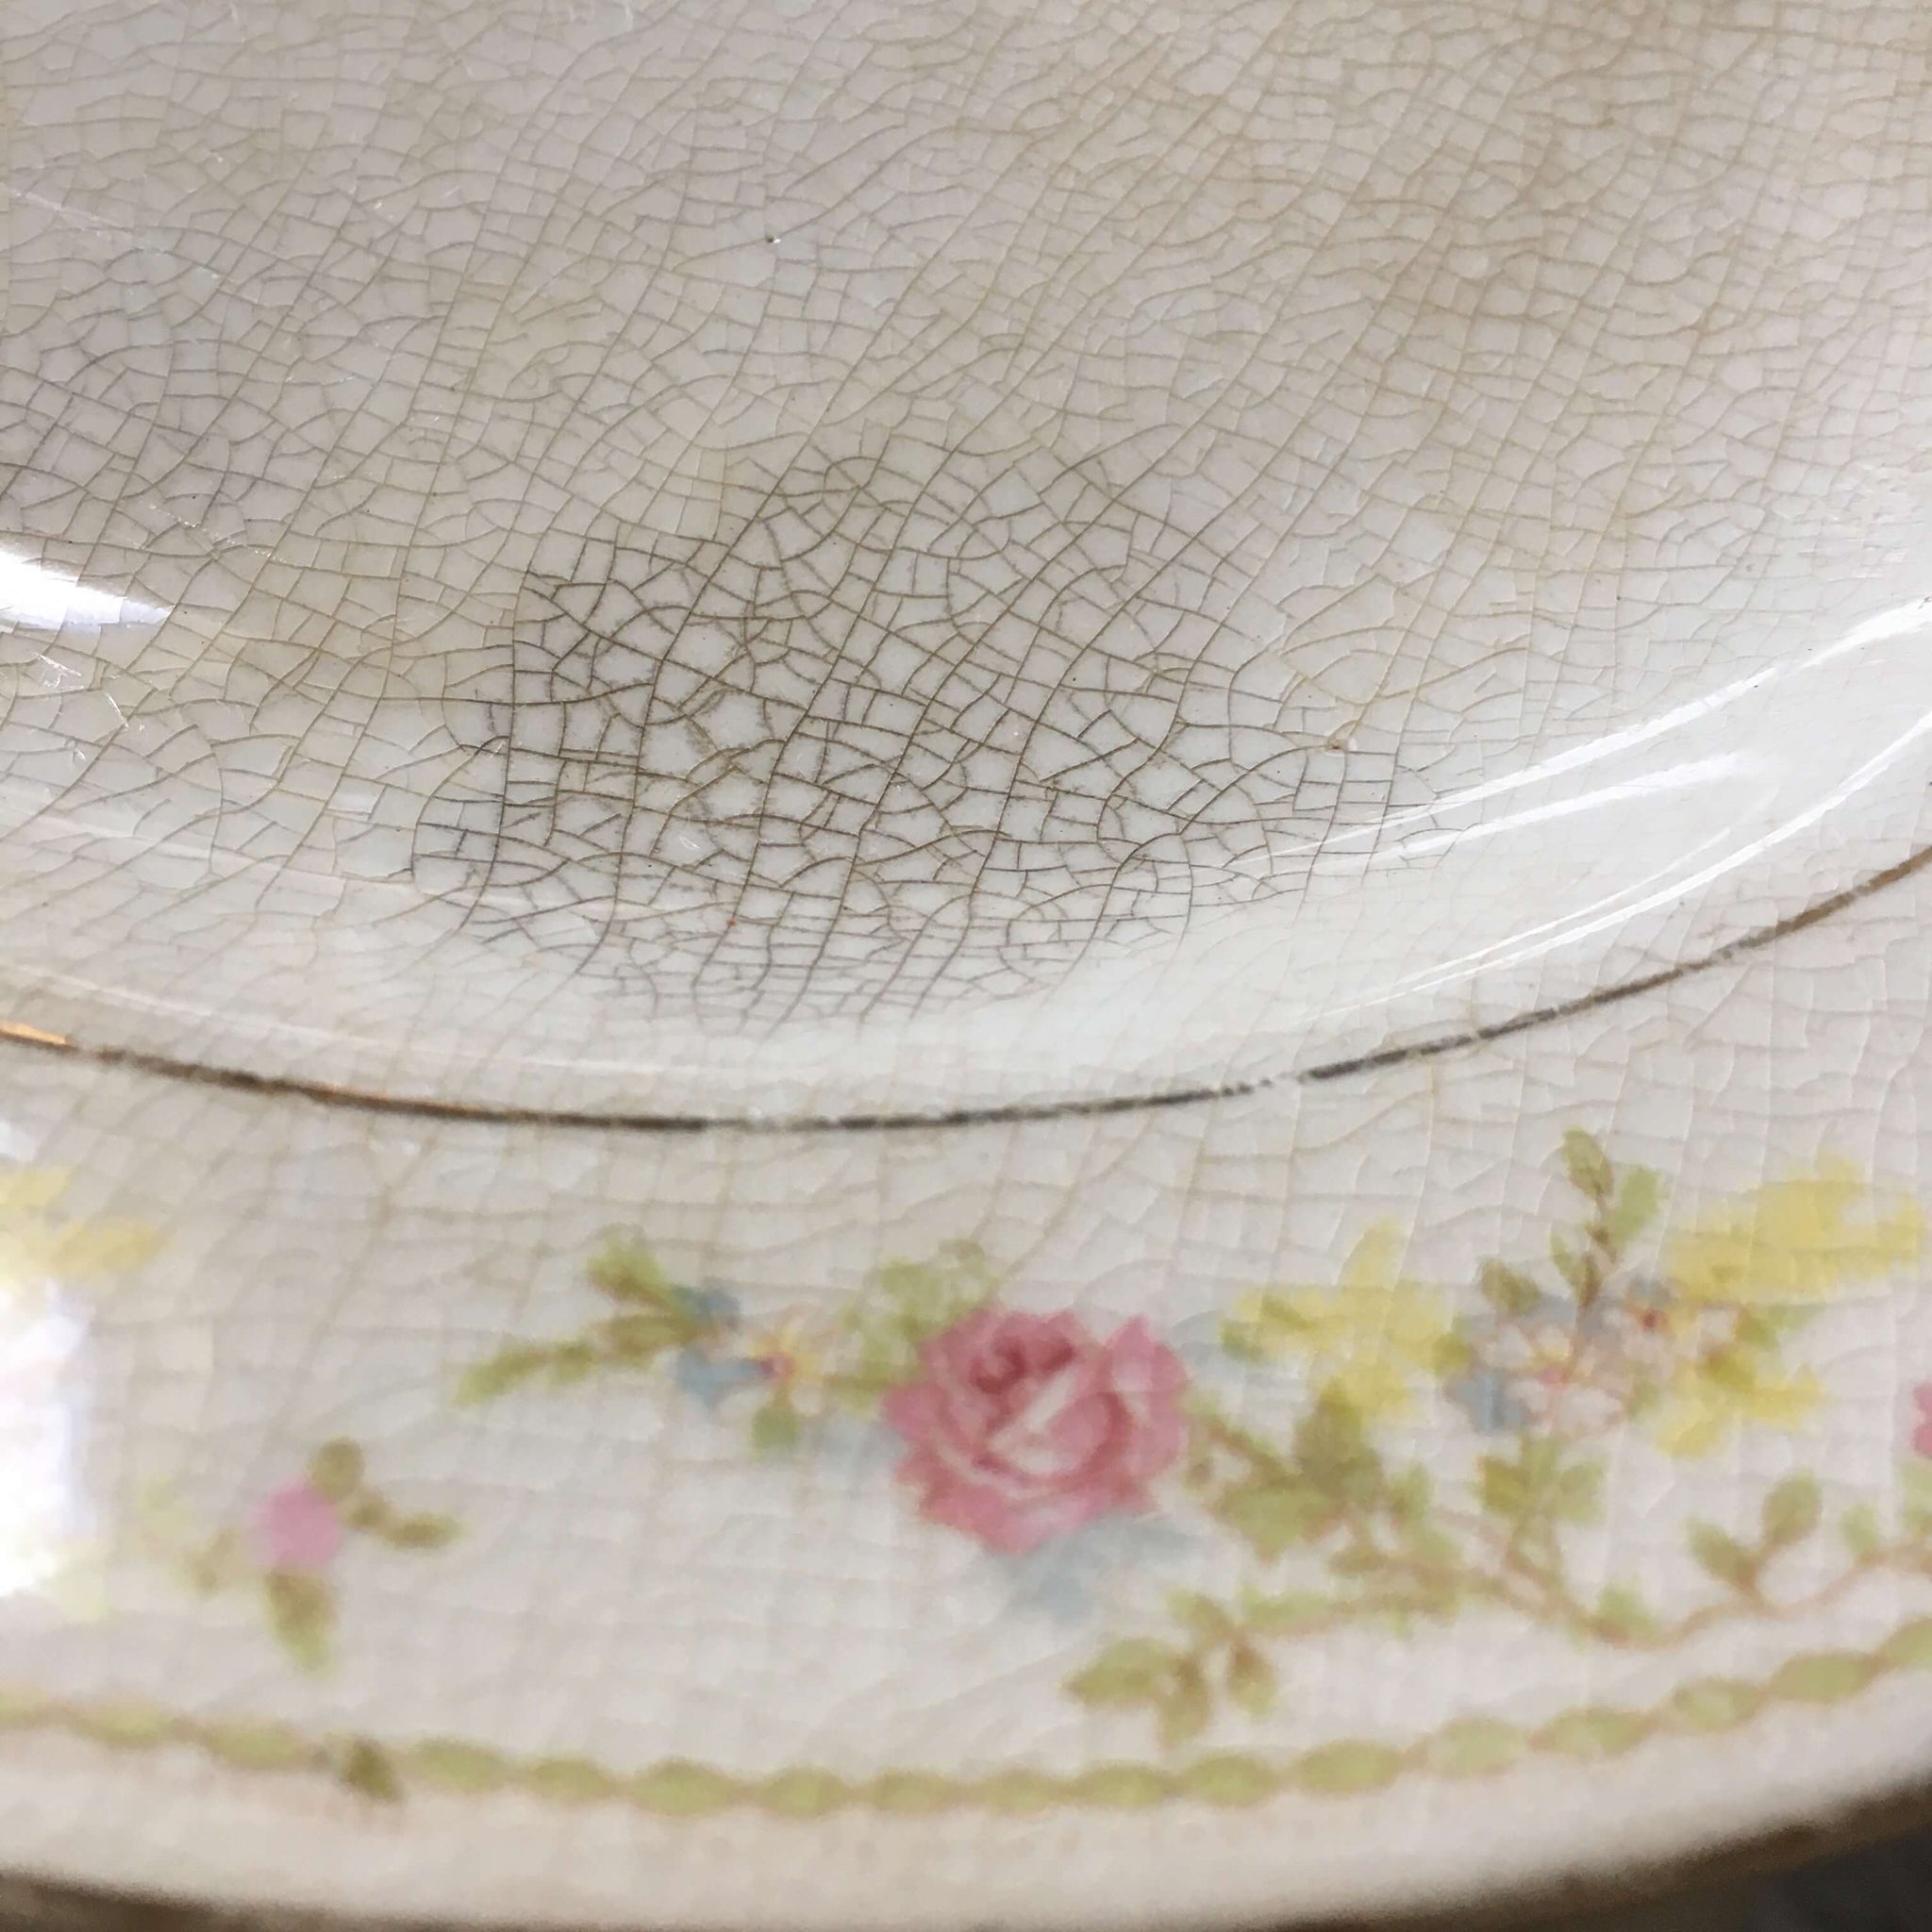 Antique Knowles Taylor & Knowles Pink Rose Floral Platter circa early 1900s